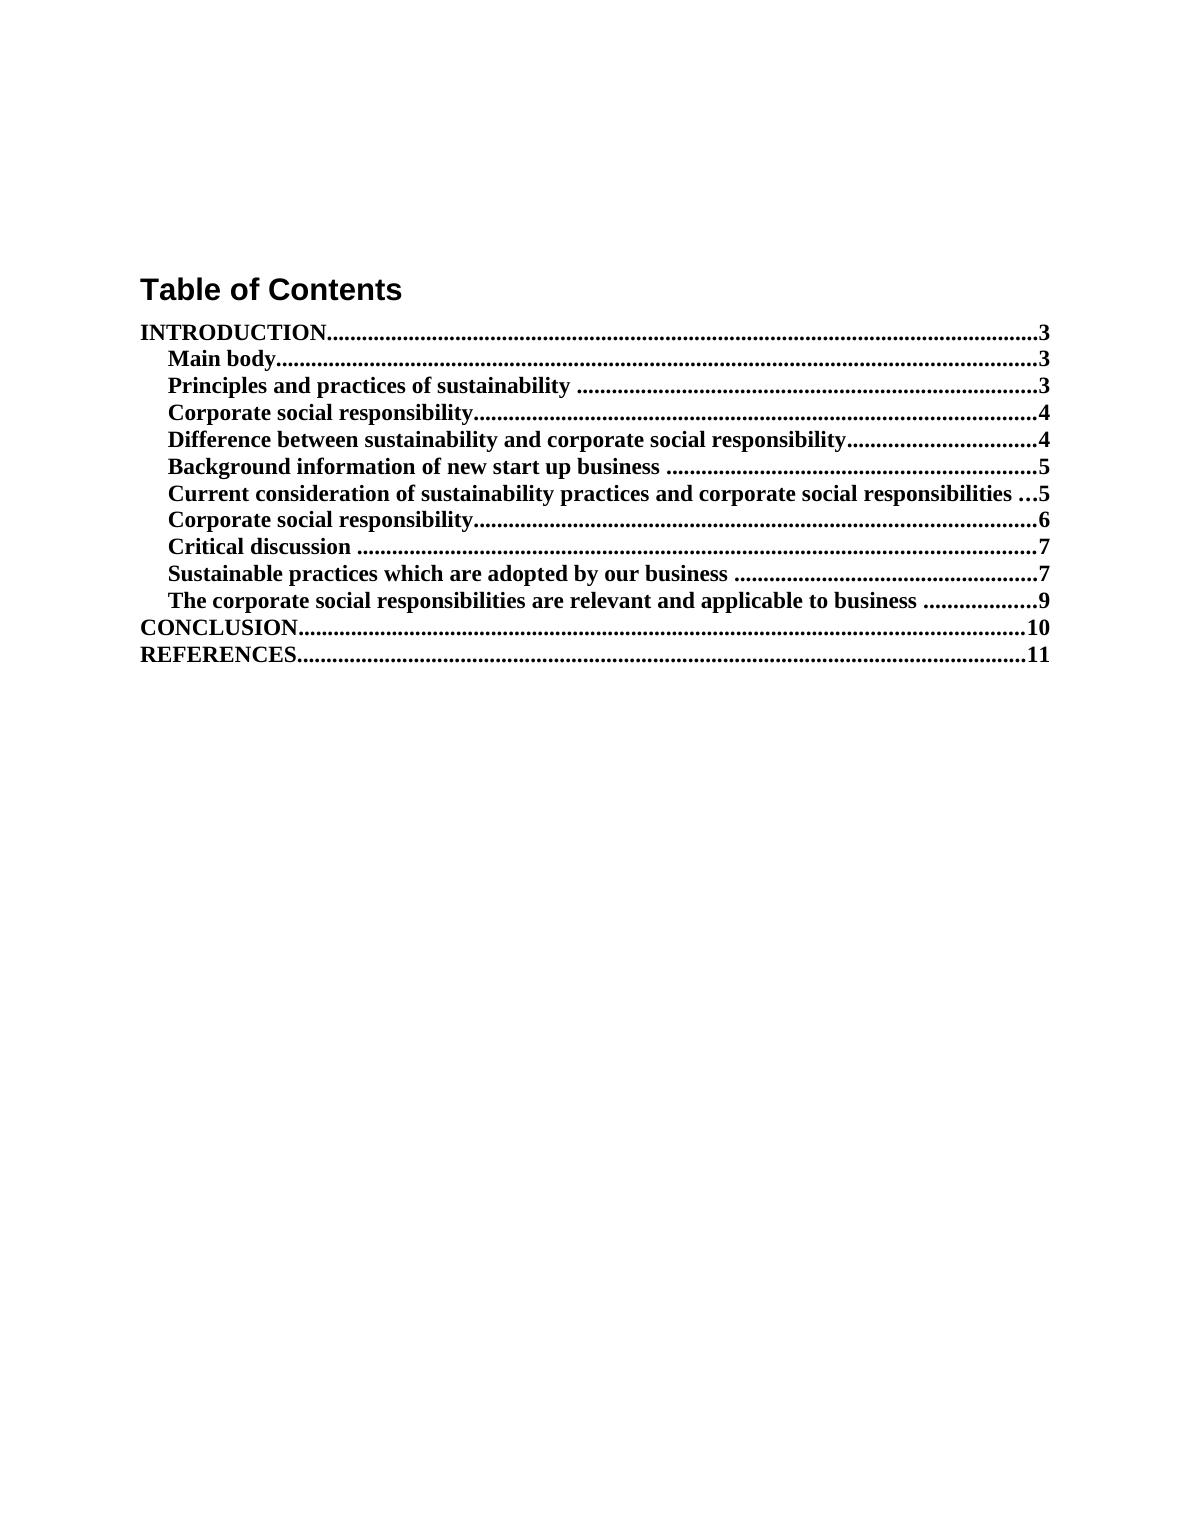 Sustainability and Corporate Social Responsibility PDF_2